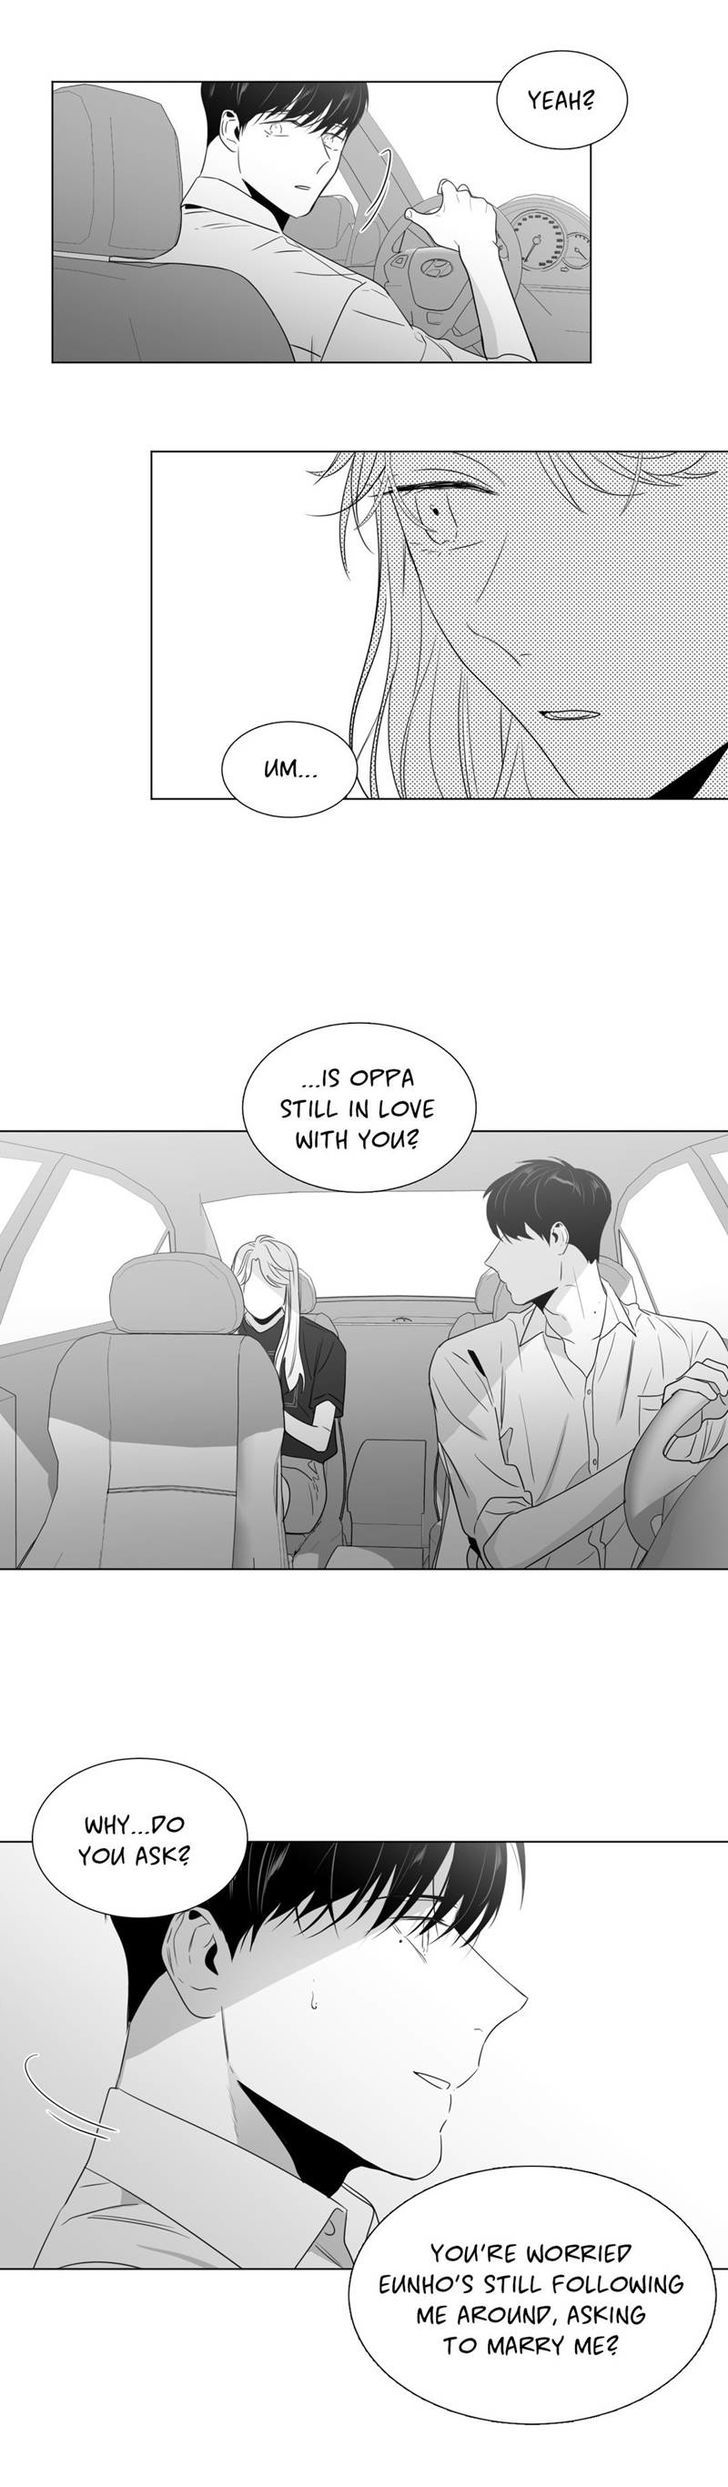 Lover Boy (Lezhin) Chapter 042 page 4